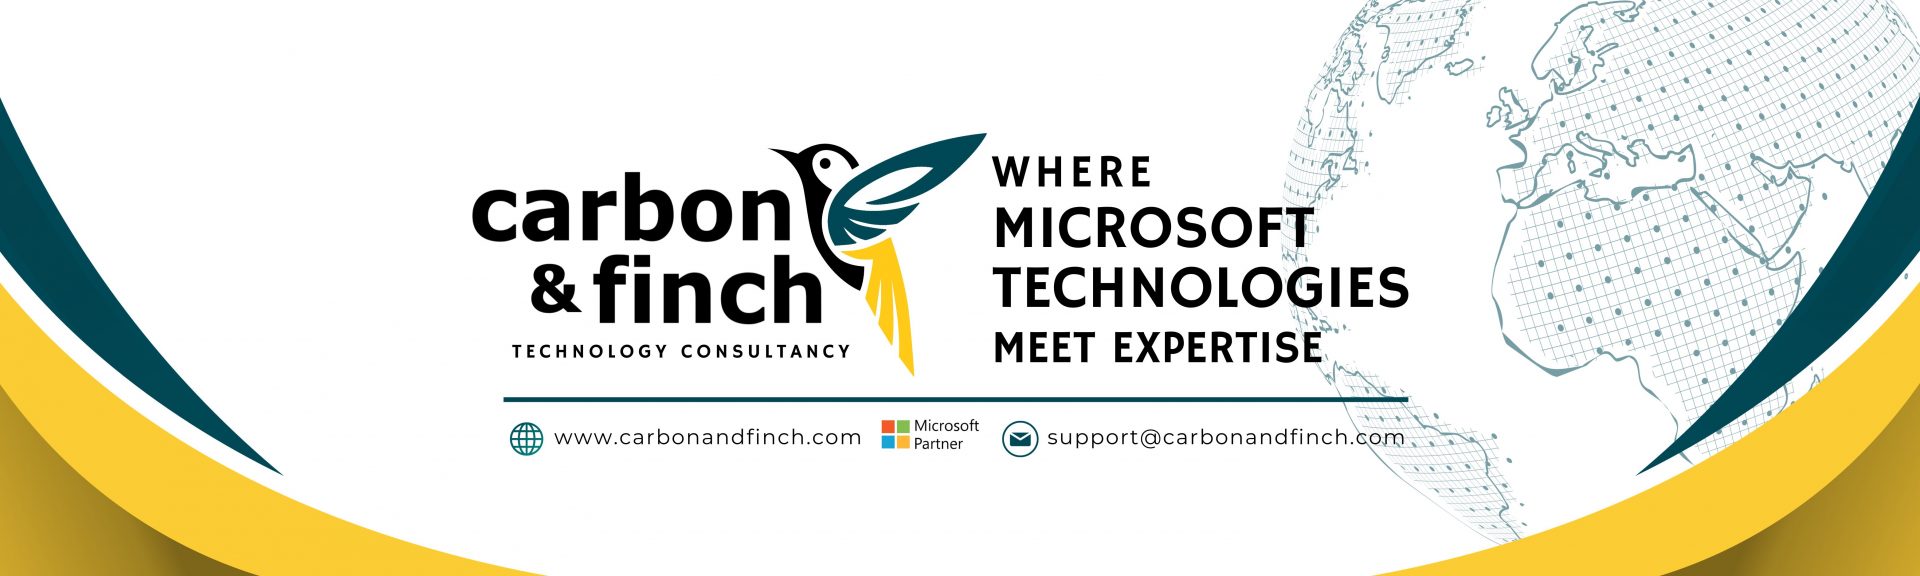 Carbon & Finch Blog: The Future is Carbon and Finch Microsoft Dynamics 365 Consultancy